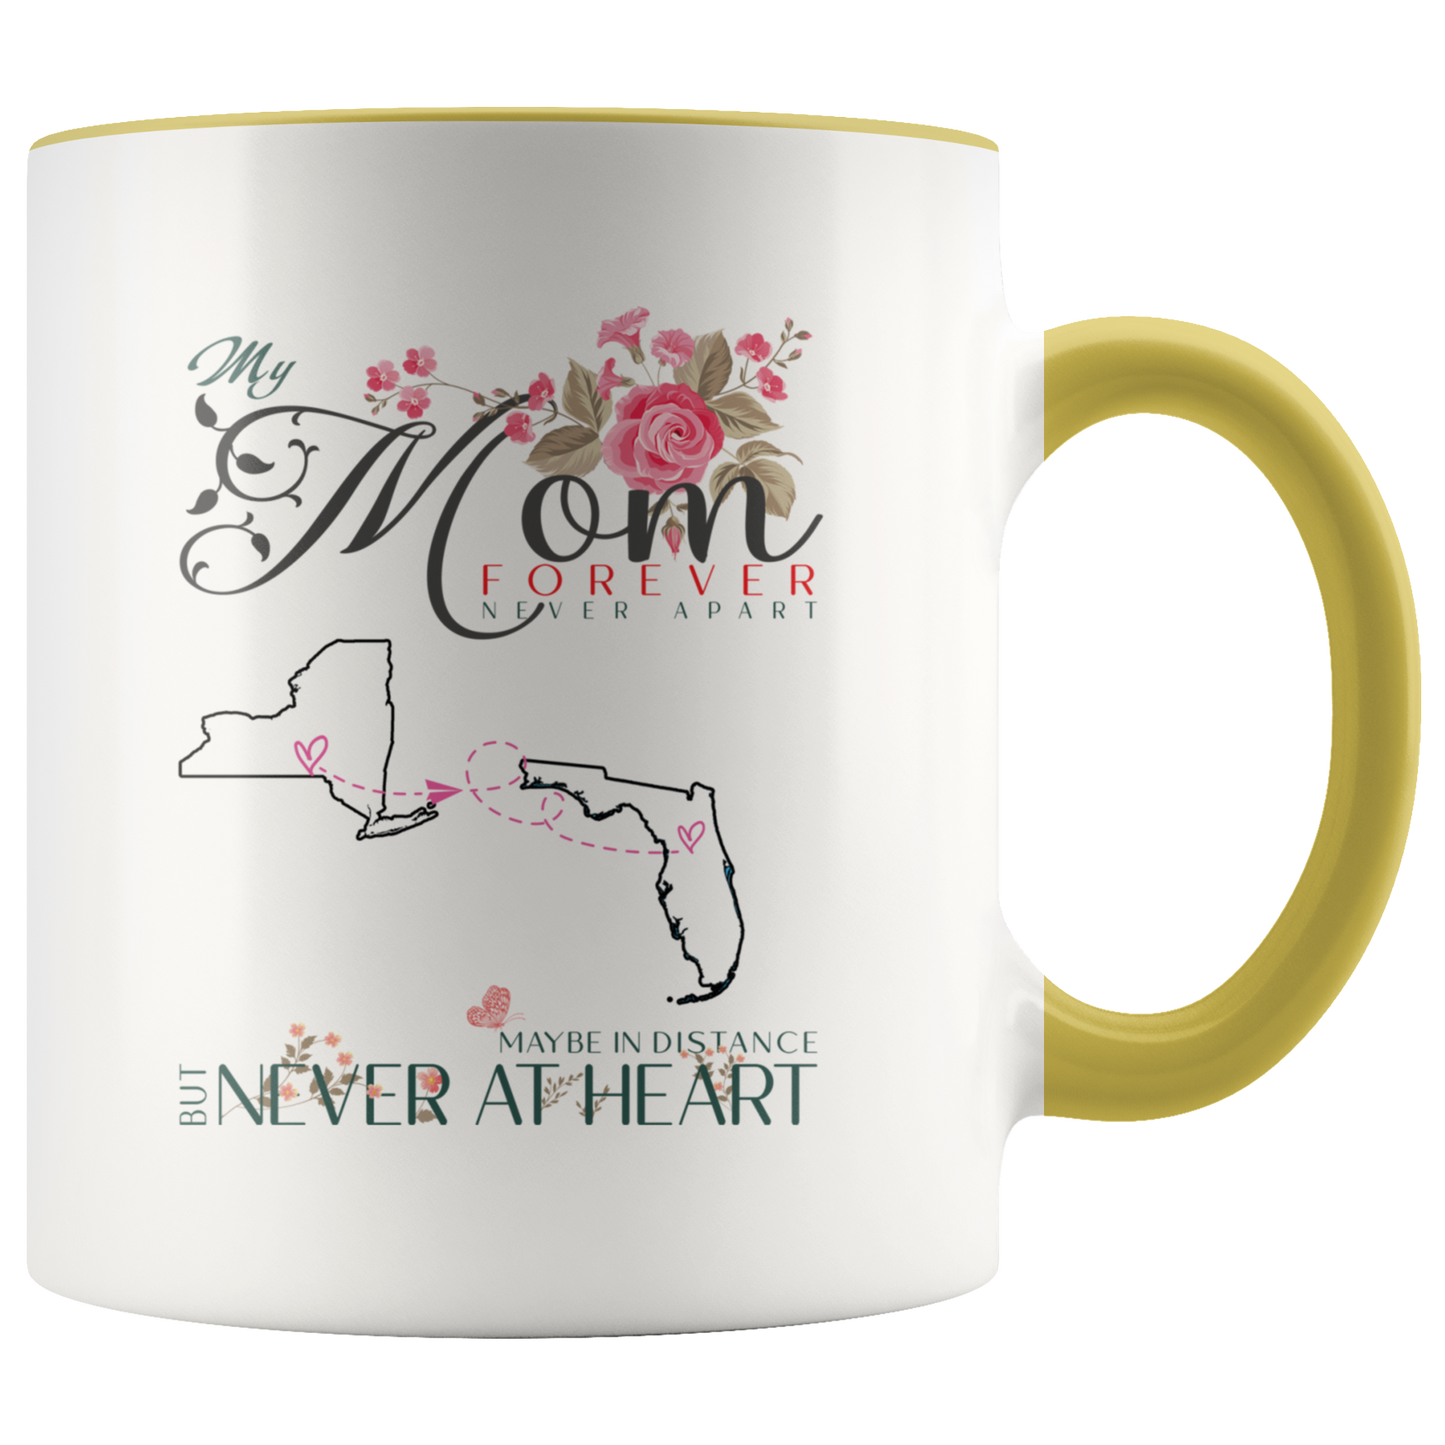 M-20321571-sp-24262 - [ New York | Florida ]Personalized Mothers Day Coffee Mug - My Mom Forever Never A